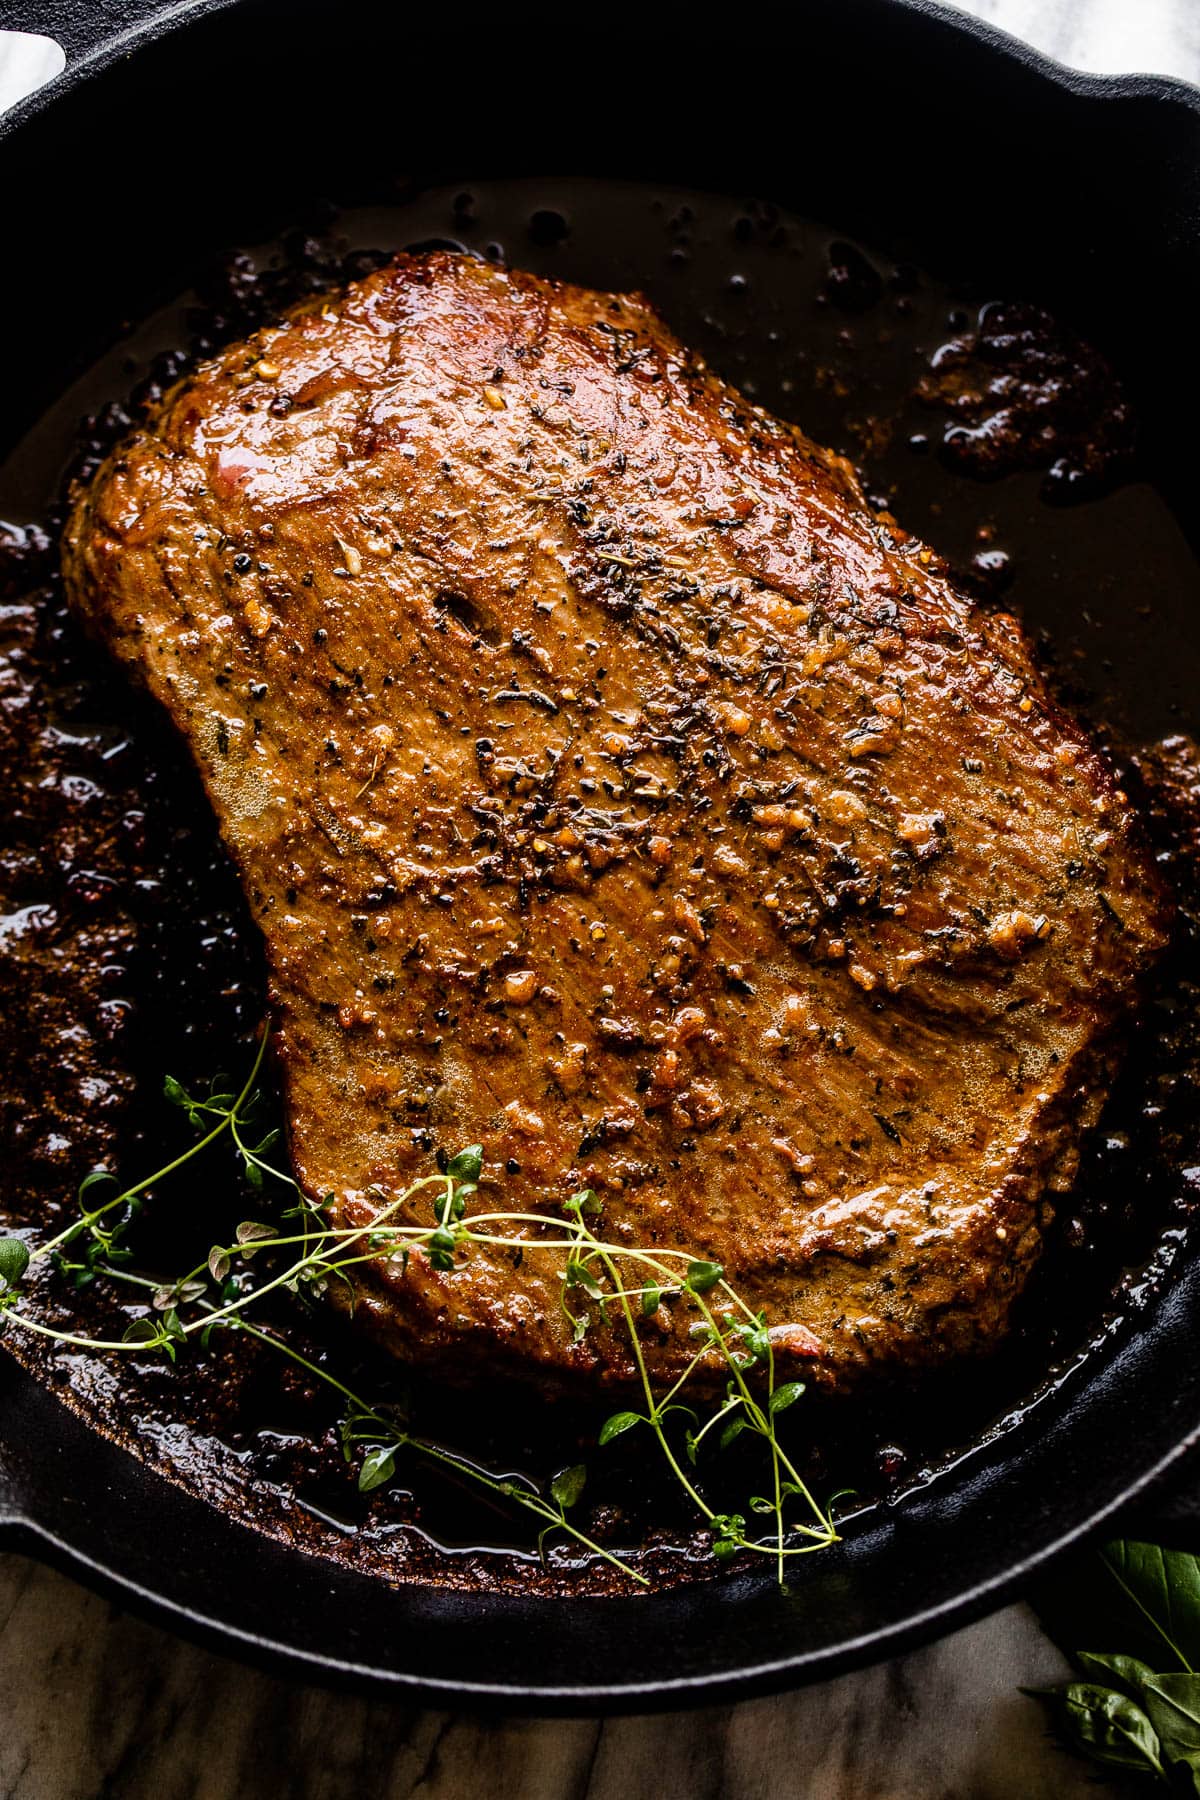 cooking london broil steak in a cast iron skillet